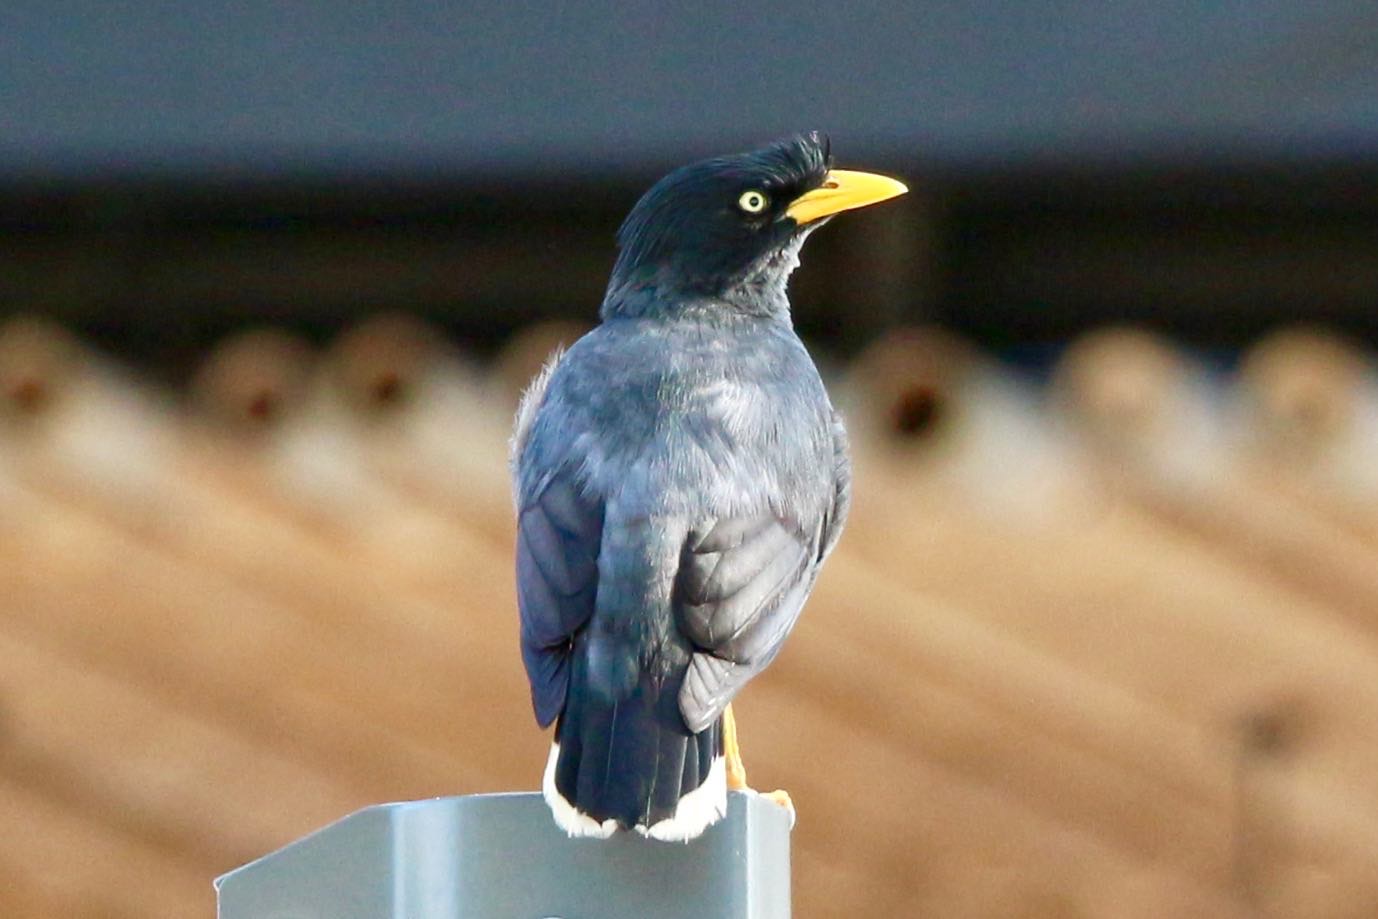 A cute little Javan myna perched on a post and looking backwards at the camera with a piercing yellow eye. It's a black and grey bird with a bright yellow beak.
